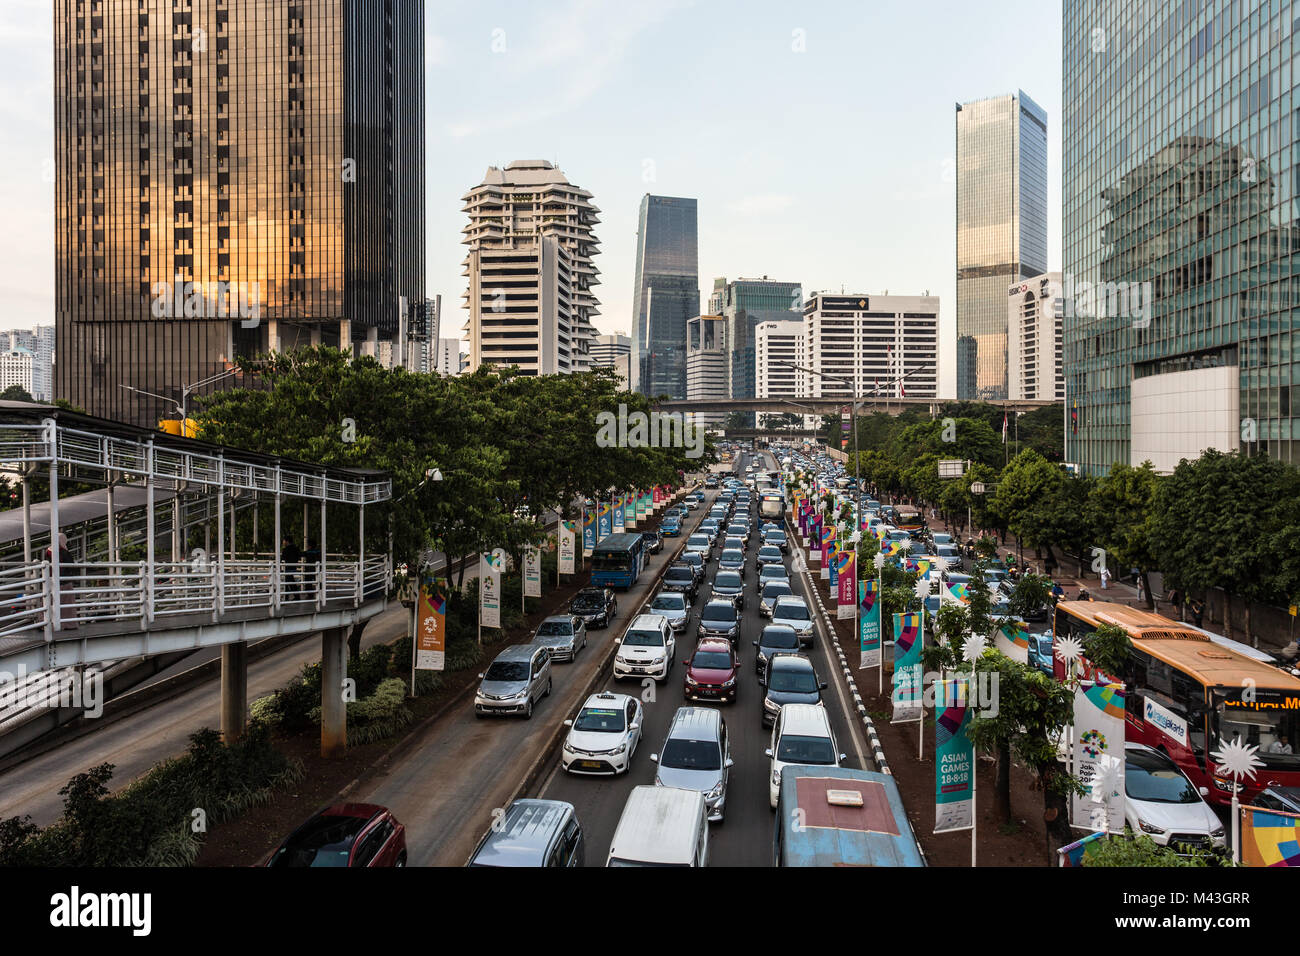 Jakarta, Indonesia - October 20 2017: Cars, buses and other vehicules stuck in a traffic jam on Sudirman street in Jakarta business district in Indone Stock Photo